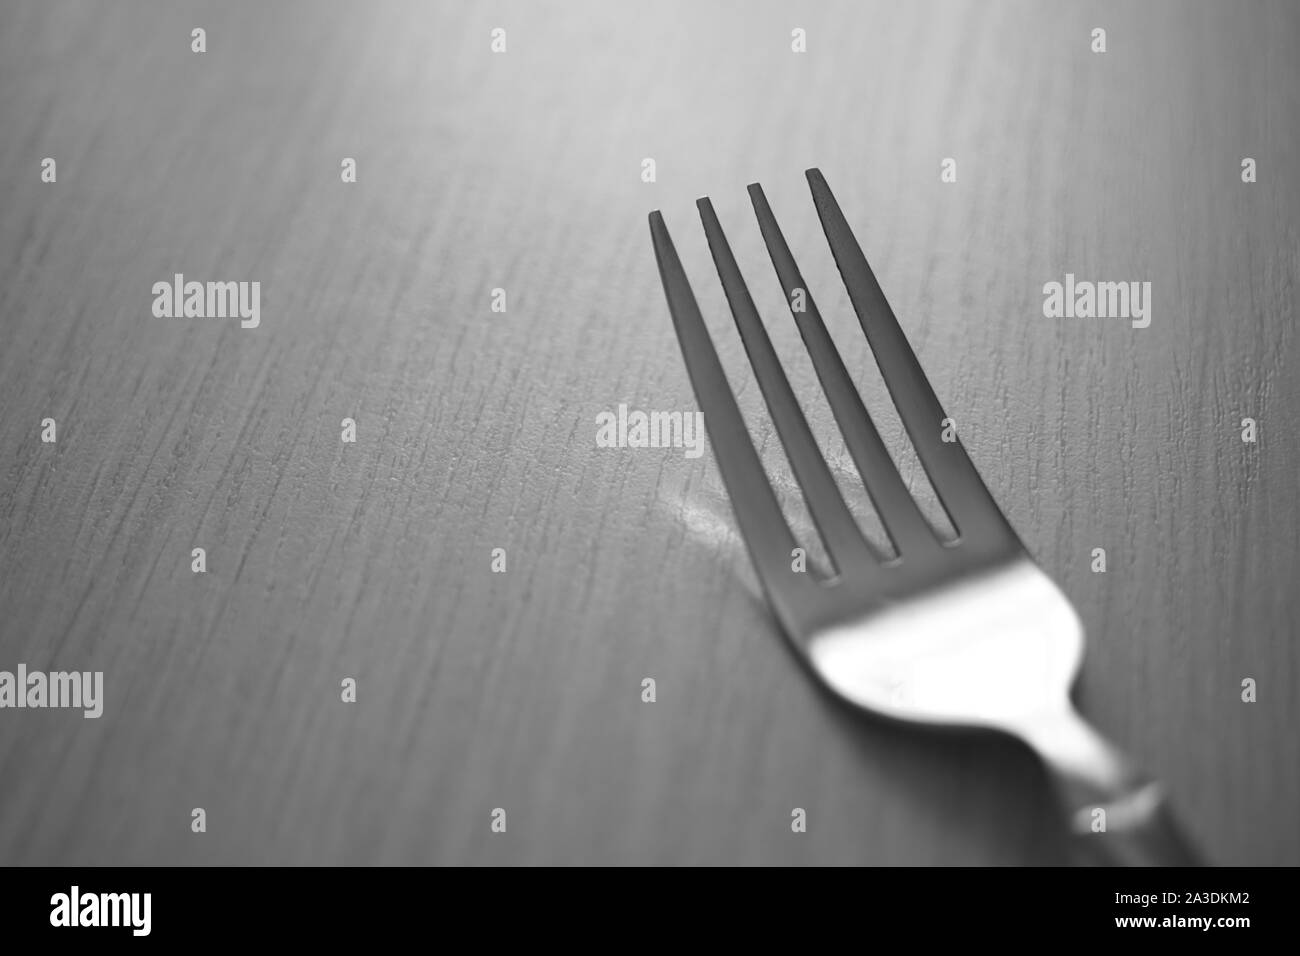 fork on the wooden table, black and white photo. Stock Photo